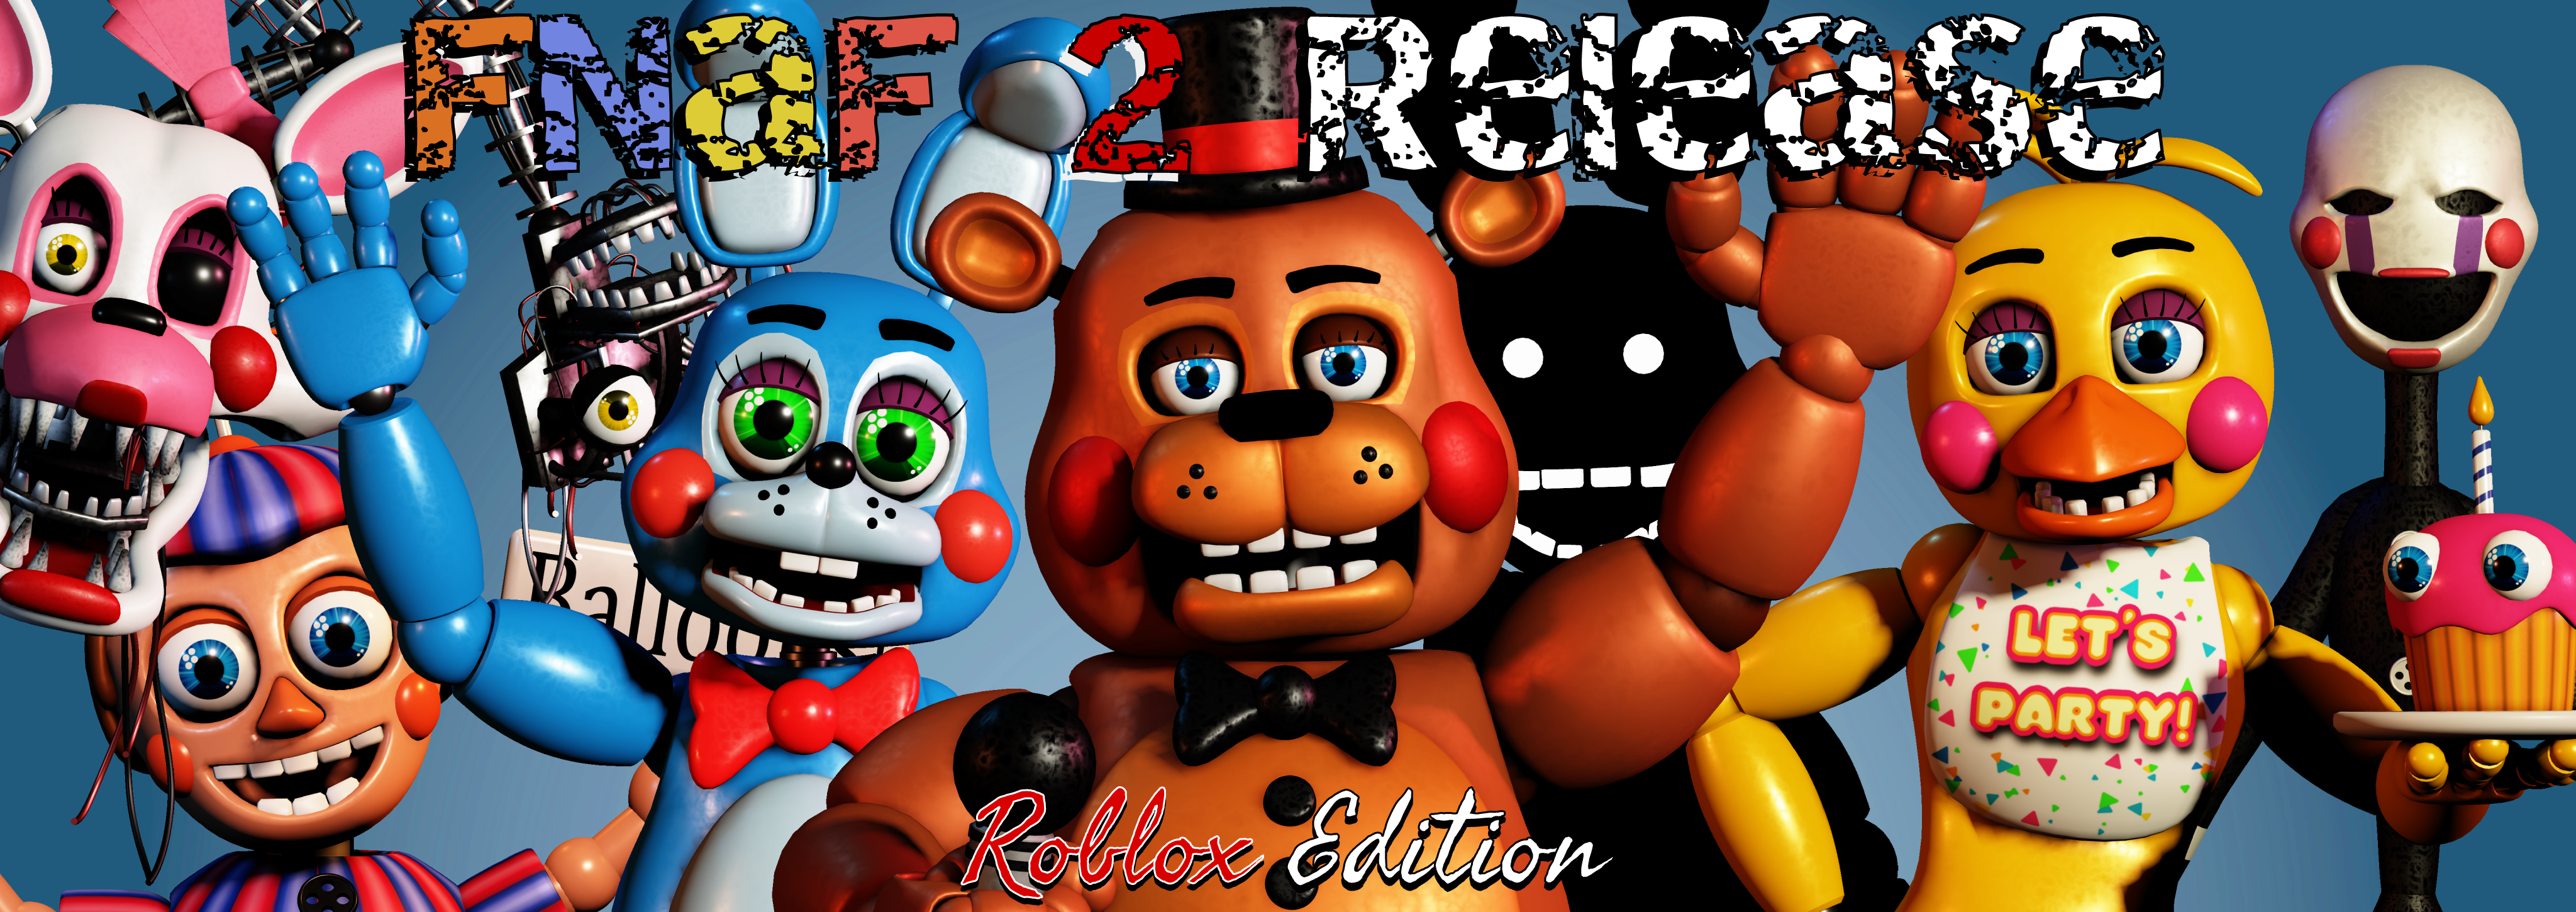 fnaf2 #roblox, Five Nights At Freddy's Video Game